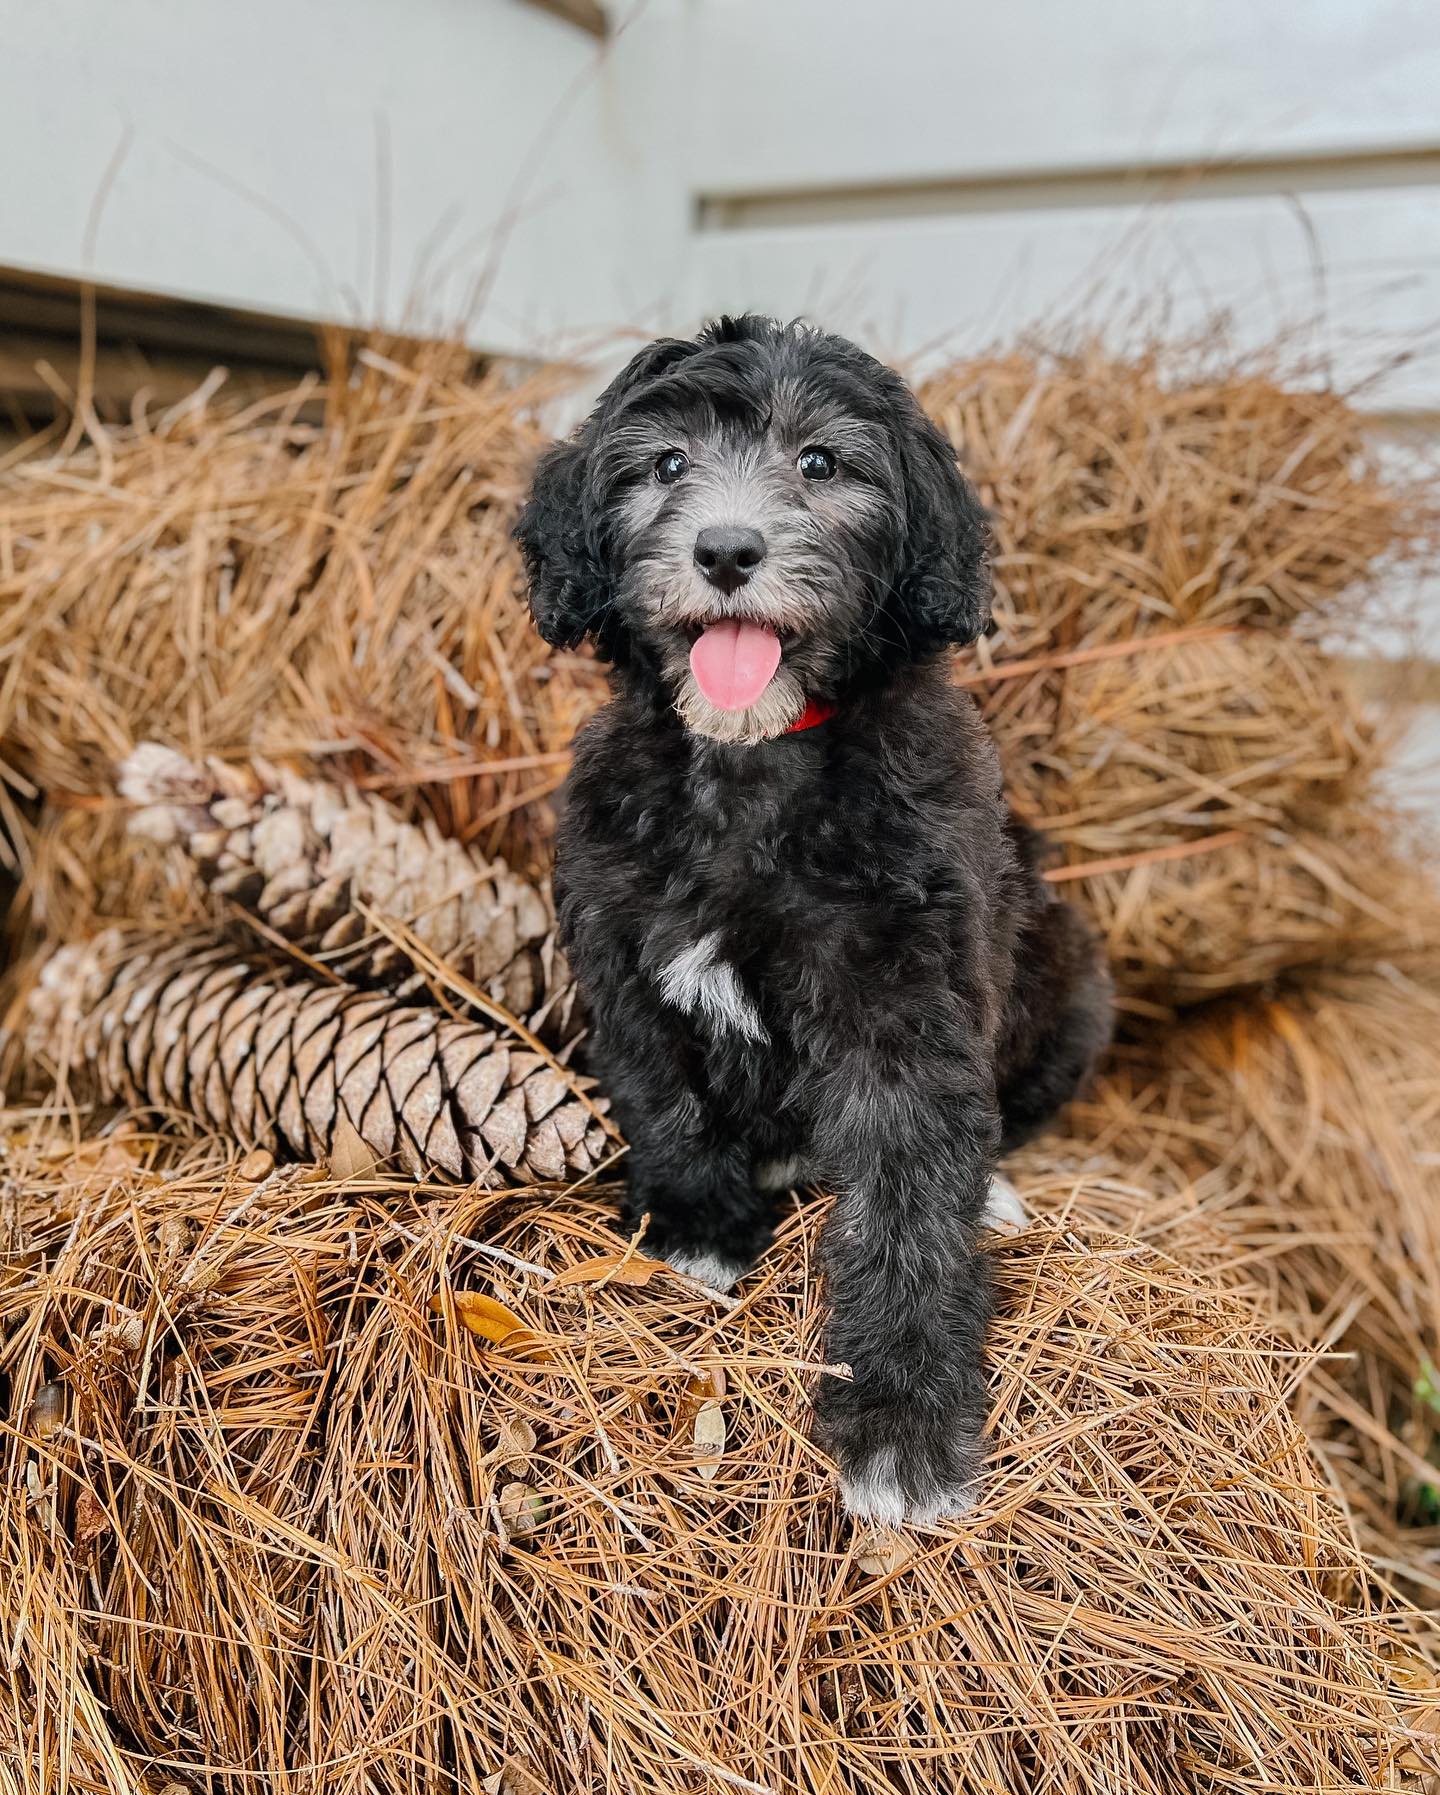 An example of a black goldendoodle from Smeraglia